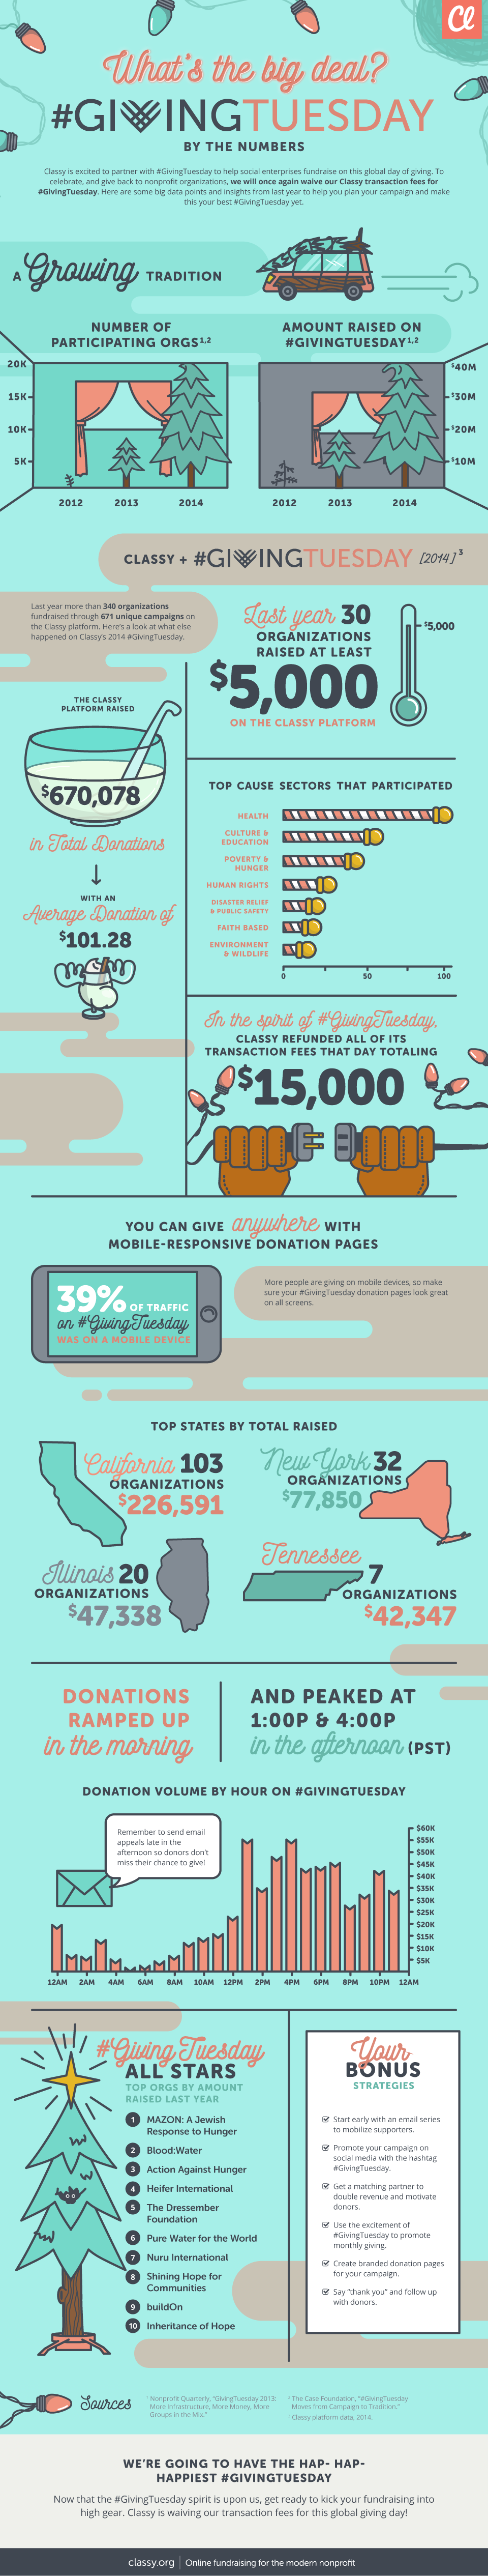 giving-tuesday-infographic.png